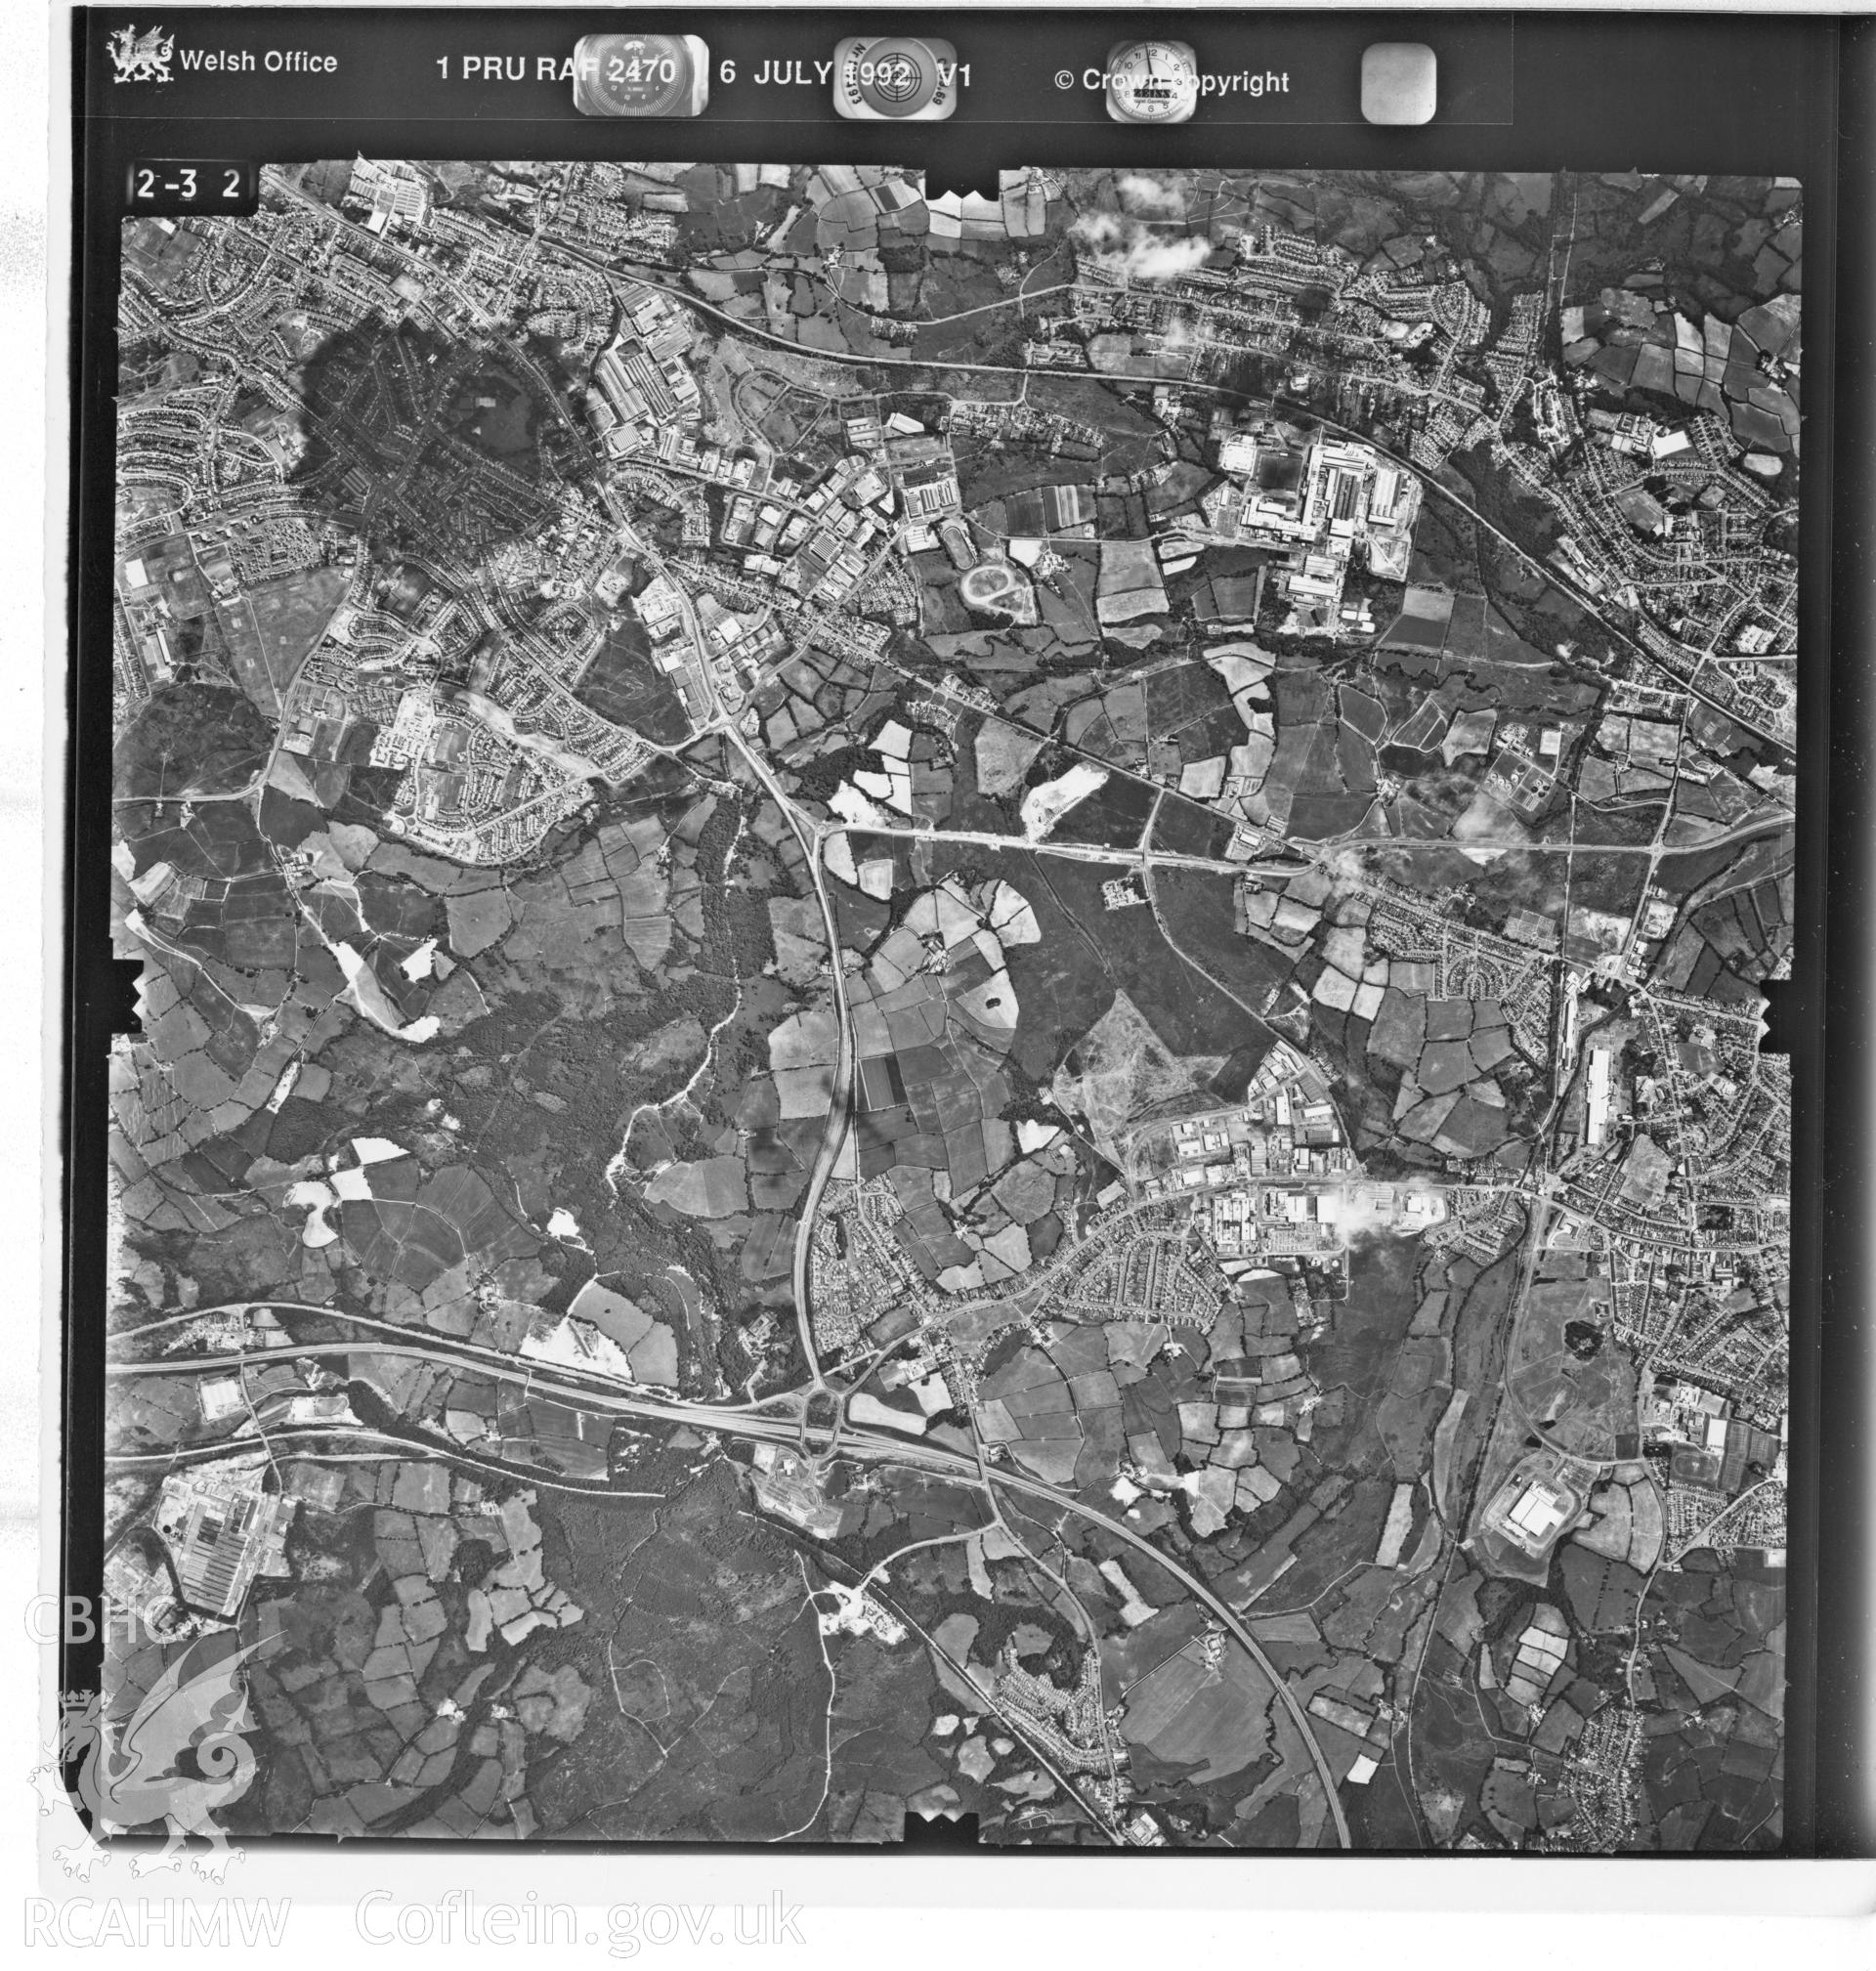 Black and white aerial photograph taken on 6th July 1992. Part of material used in a Setting Impact Assessment of Land off Phoenix Way, Garngoch Business Village, Swansea, carried out by Archaeology Wales, 2018. Project number P2631.